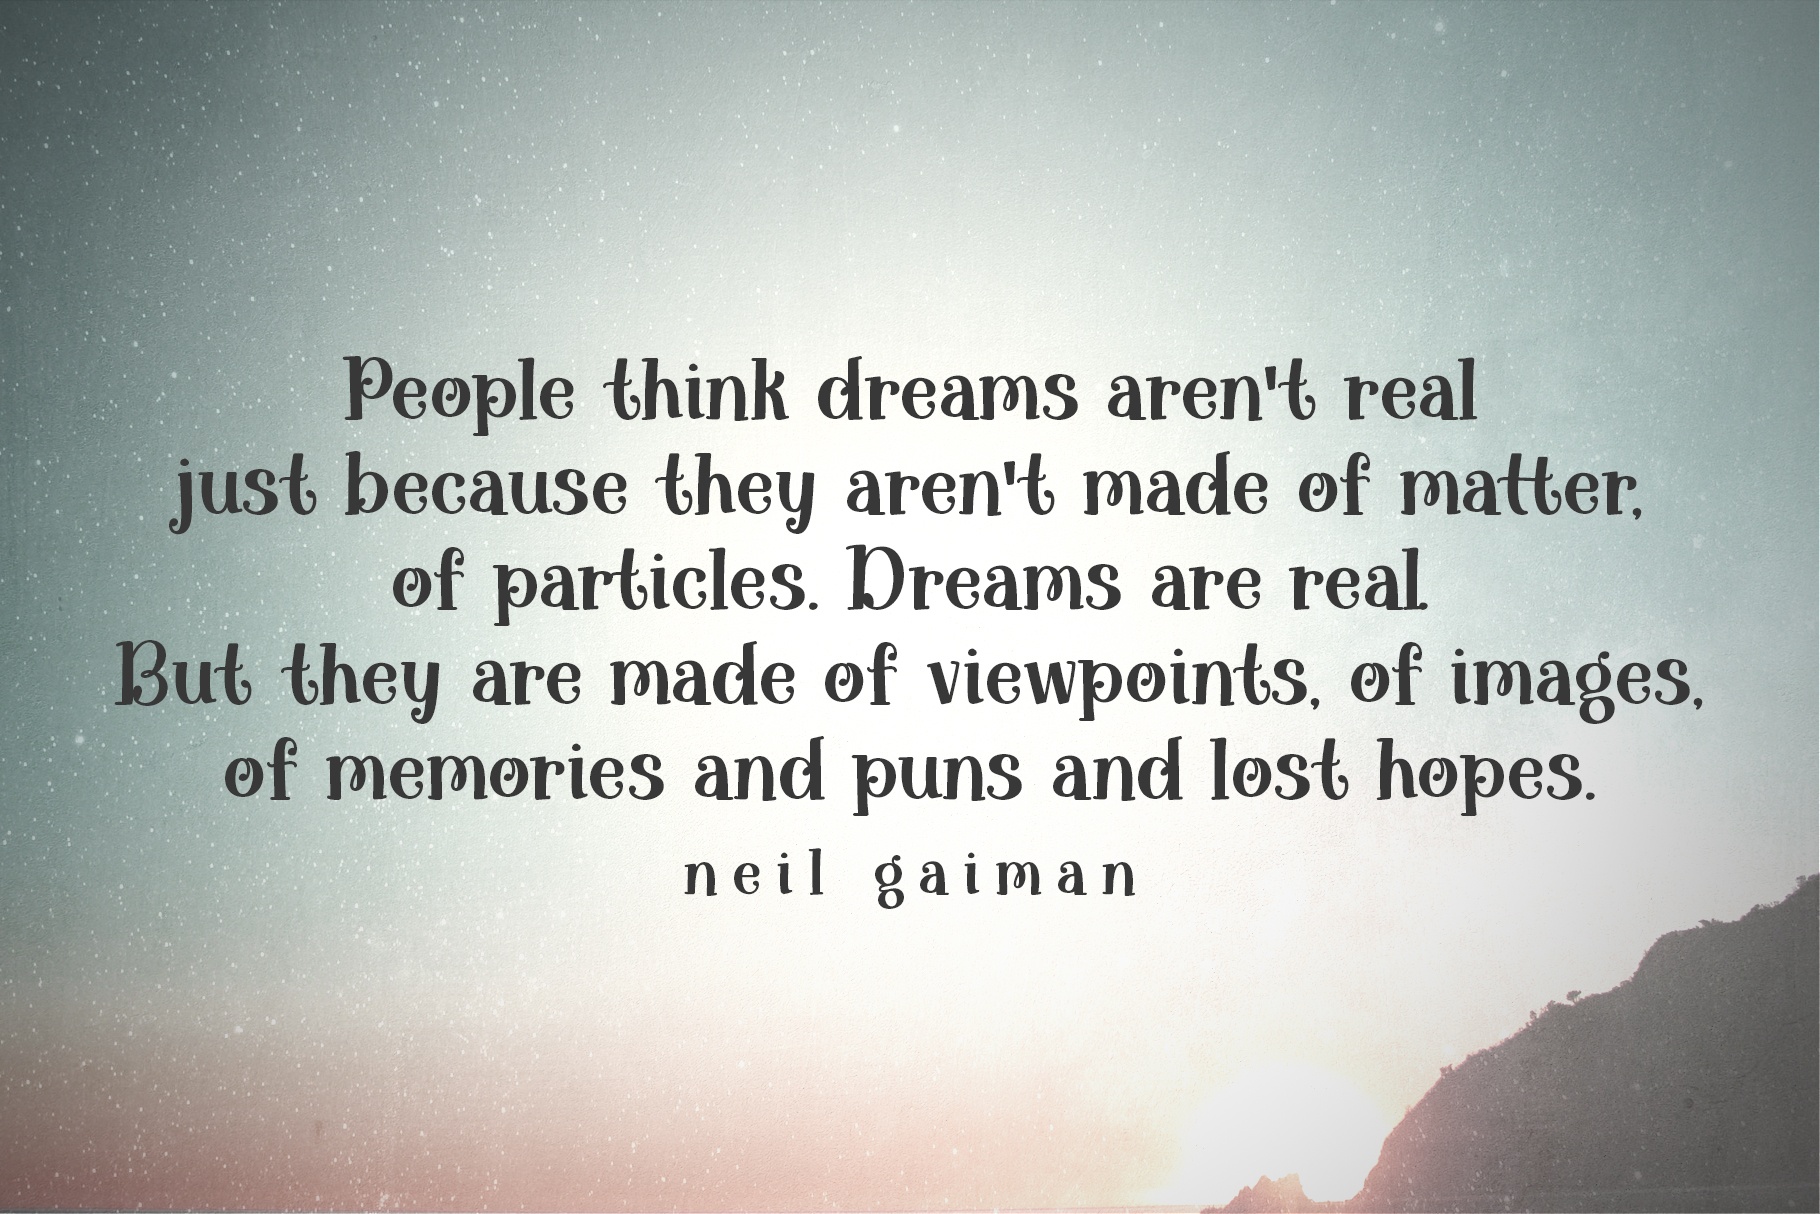 “People think dreams aren't real just because they aren't made of matter, of particles. Dreams are real. But they are made of viewpoints, of images, of memories and puns and lost hopes.” ― Neil Gaiman